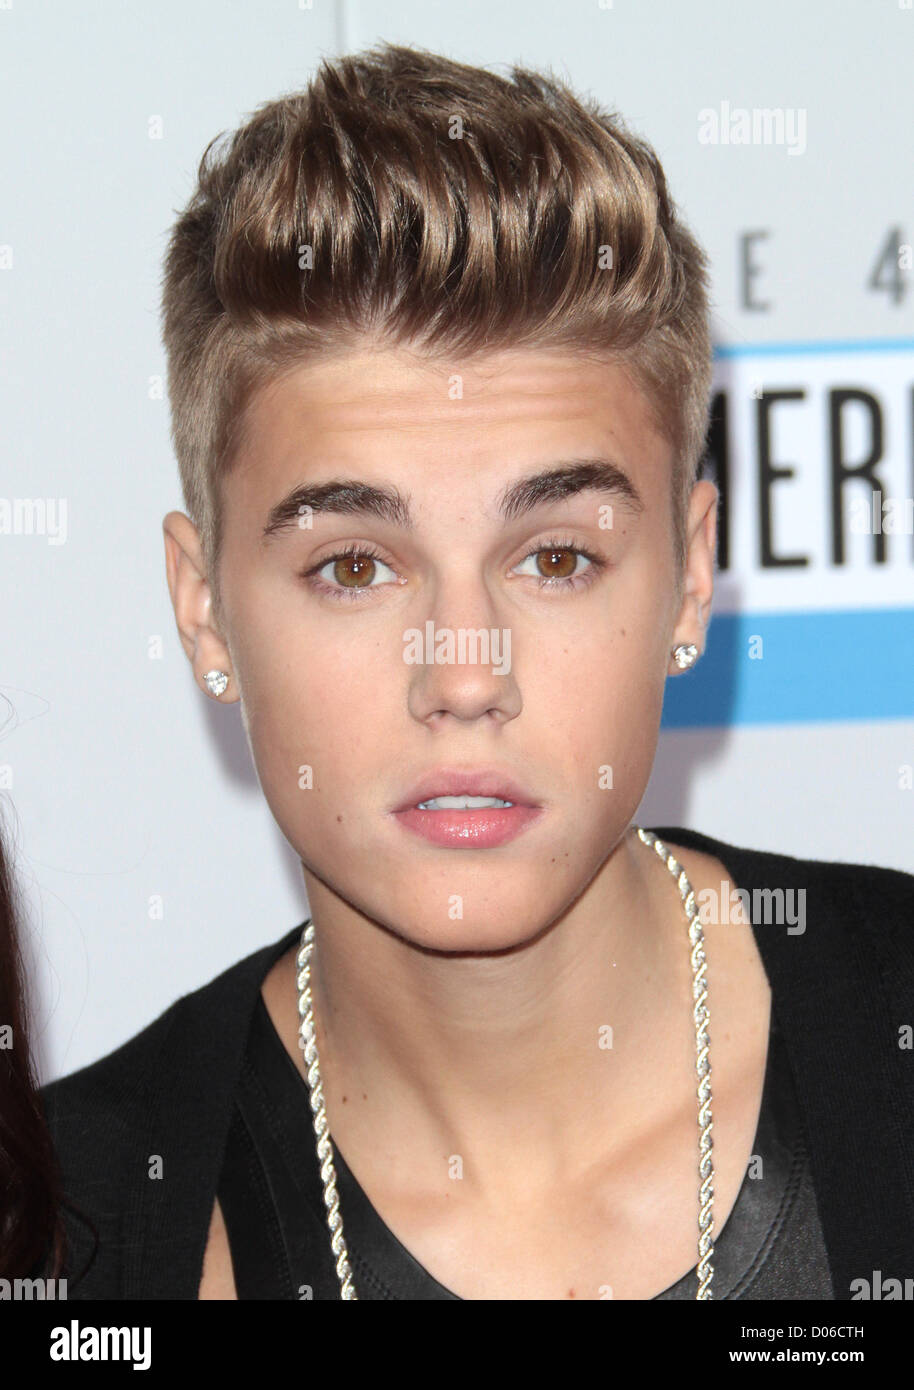 justin-bieber-the-40th-anniversary-american-music-awards-los-angeles-D06CTH.jpg